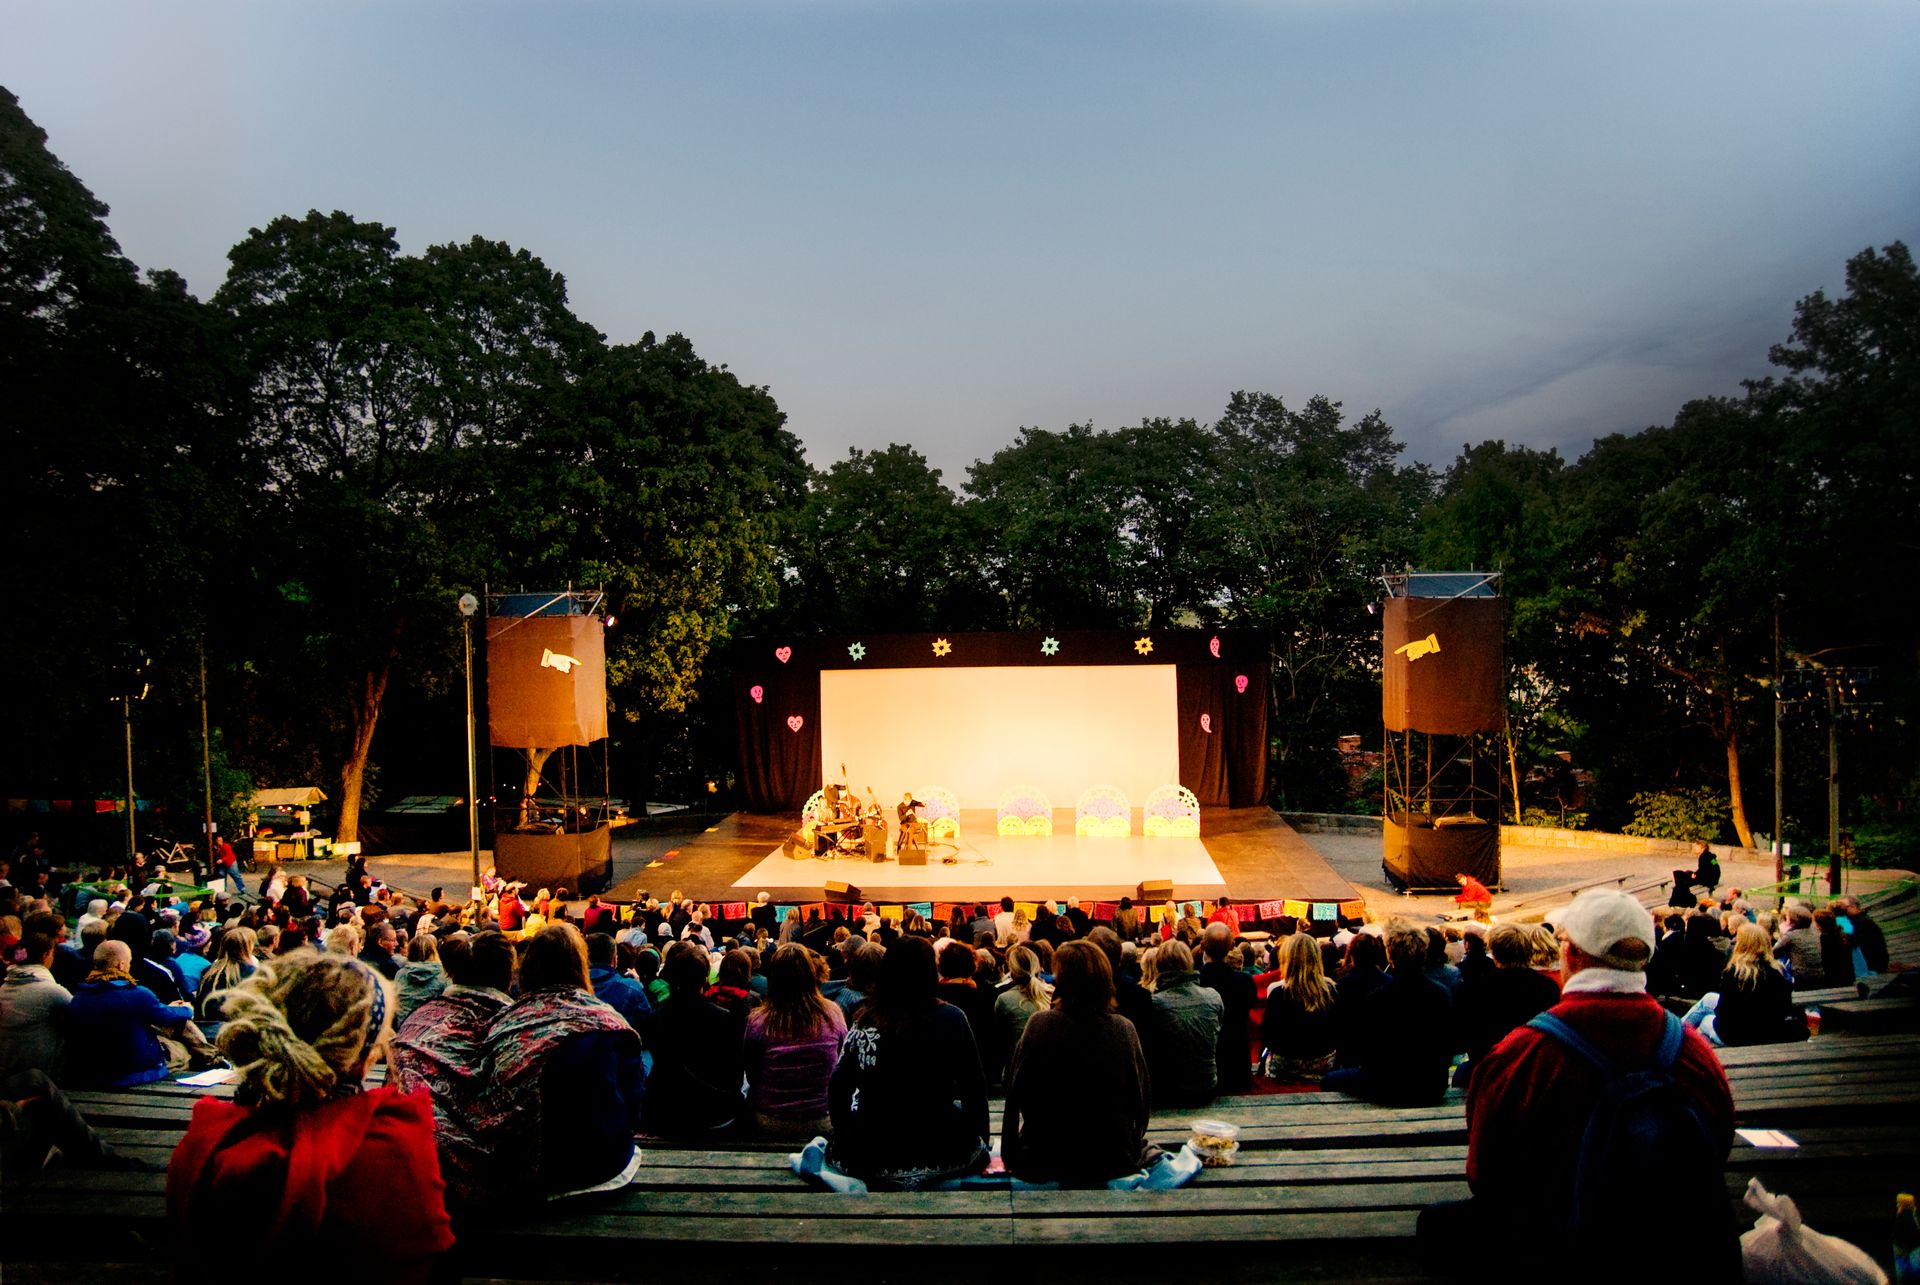 The audience is watching a theatre performance outdoors in Stockholm.